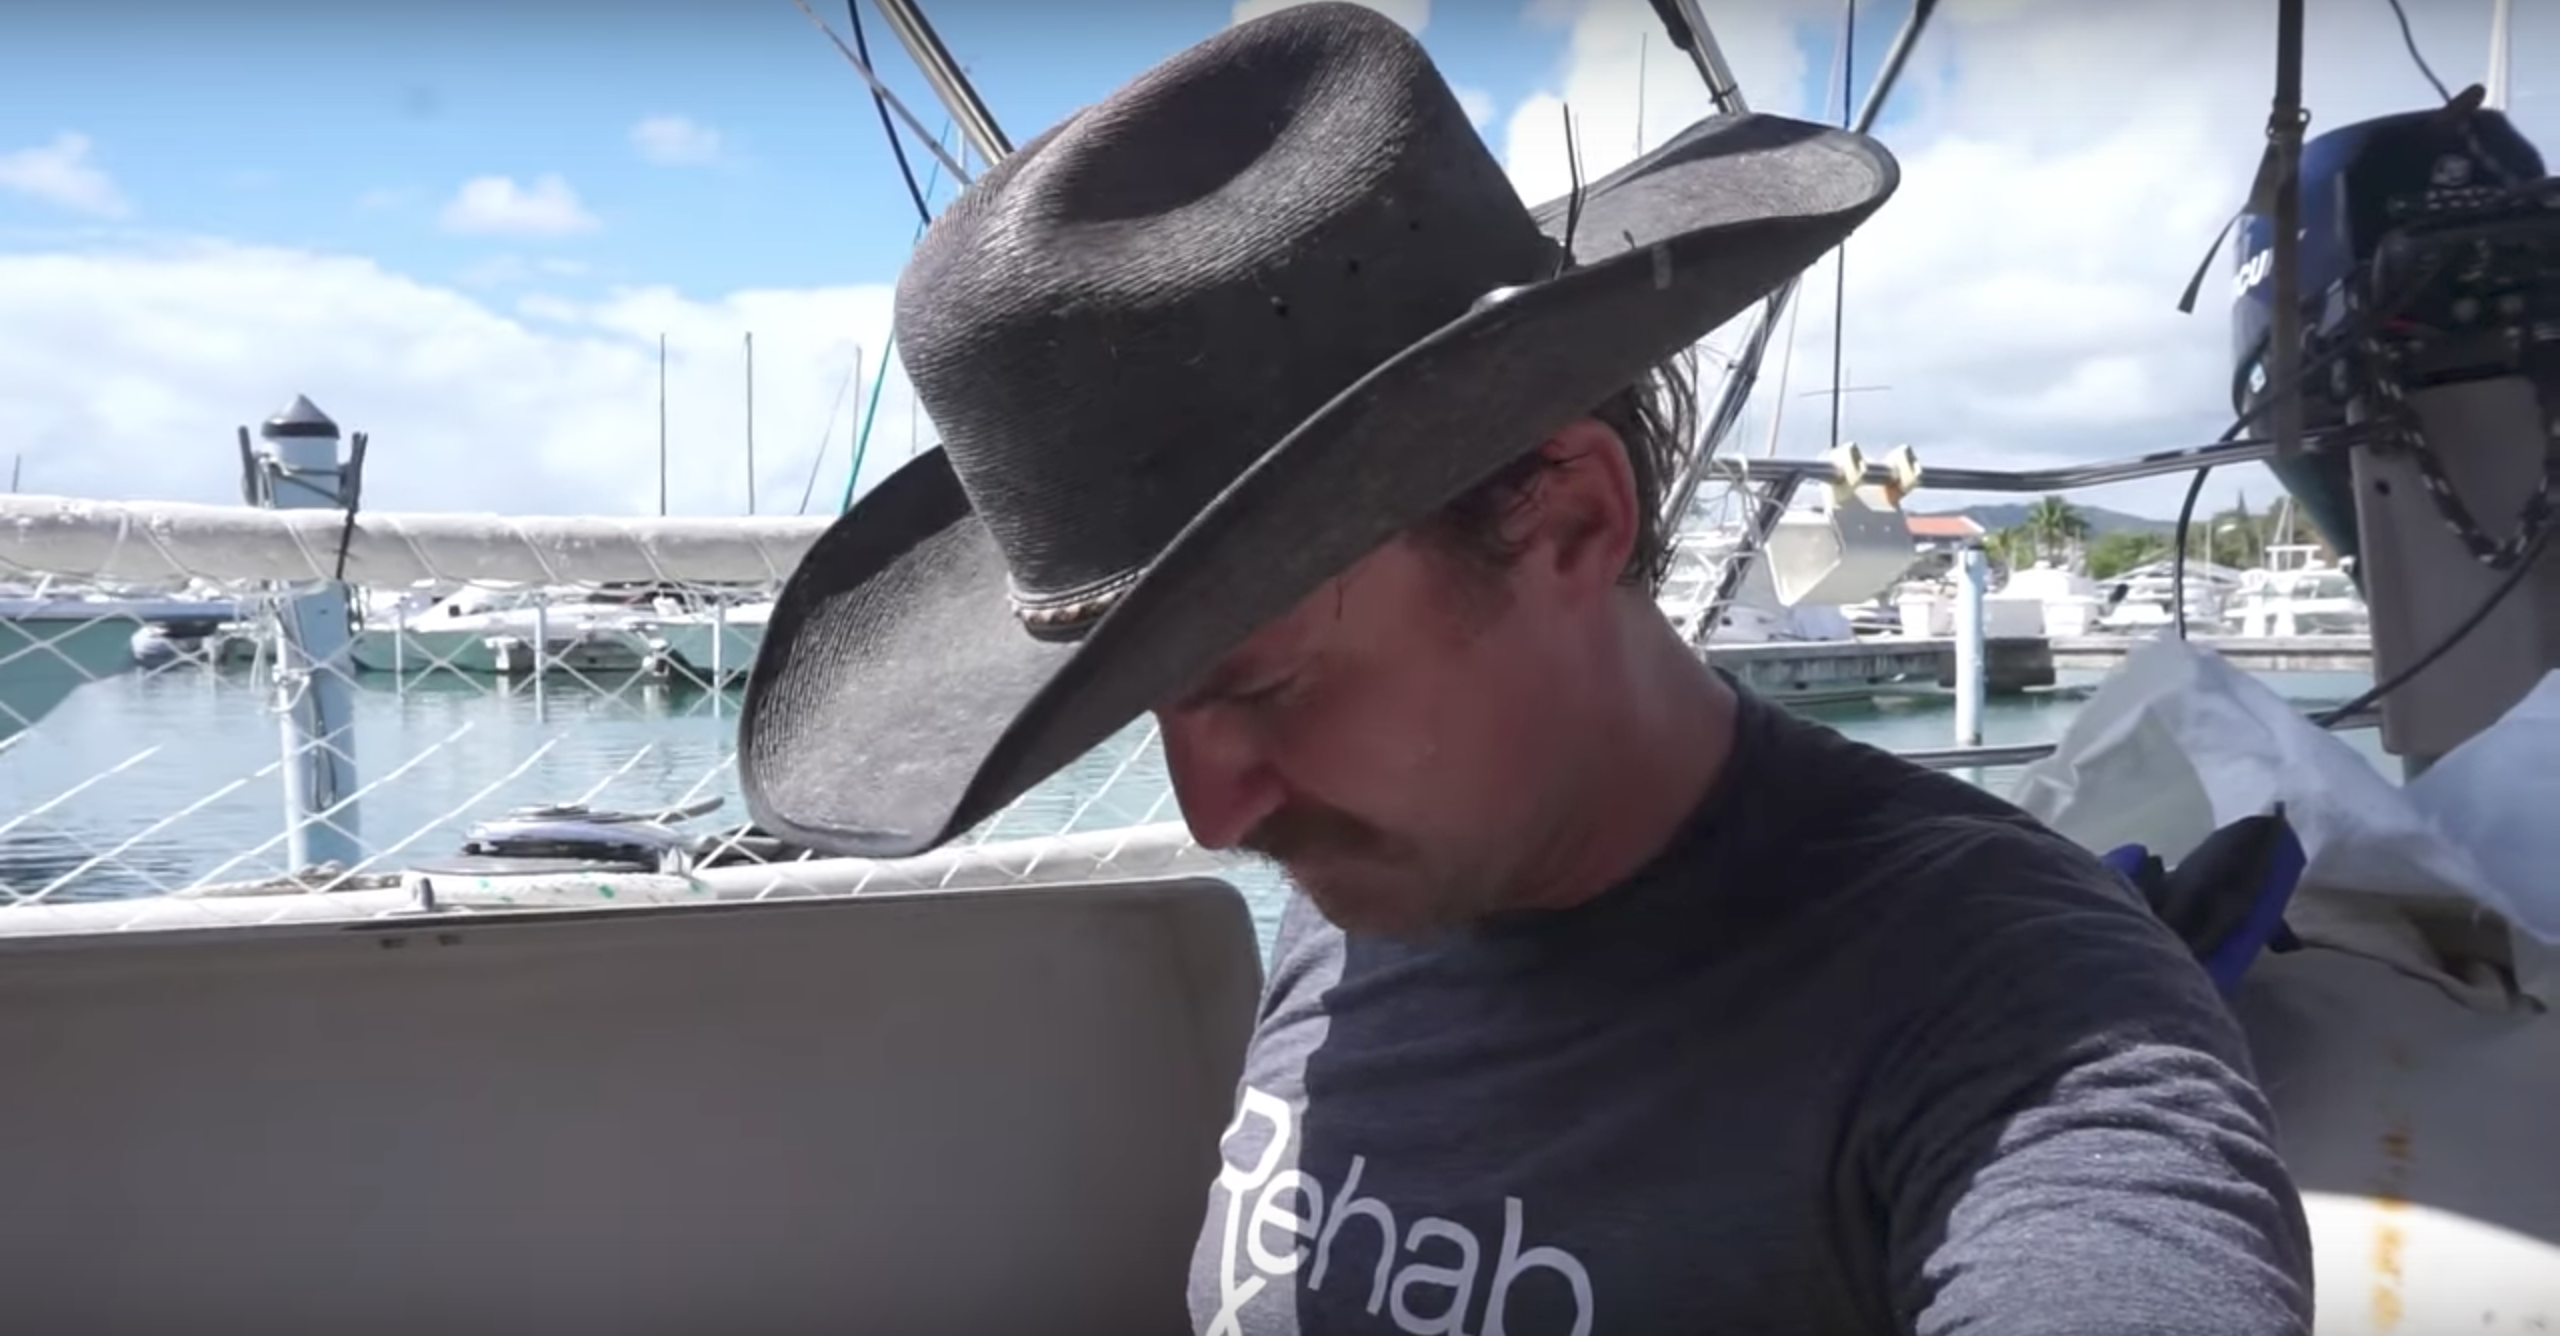 How To: Replace An Inverter On Your Sailboat